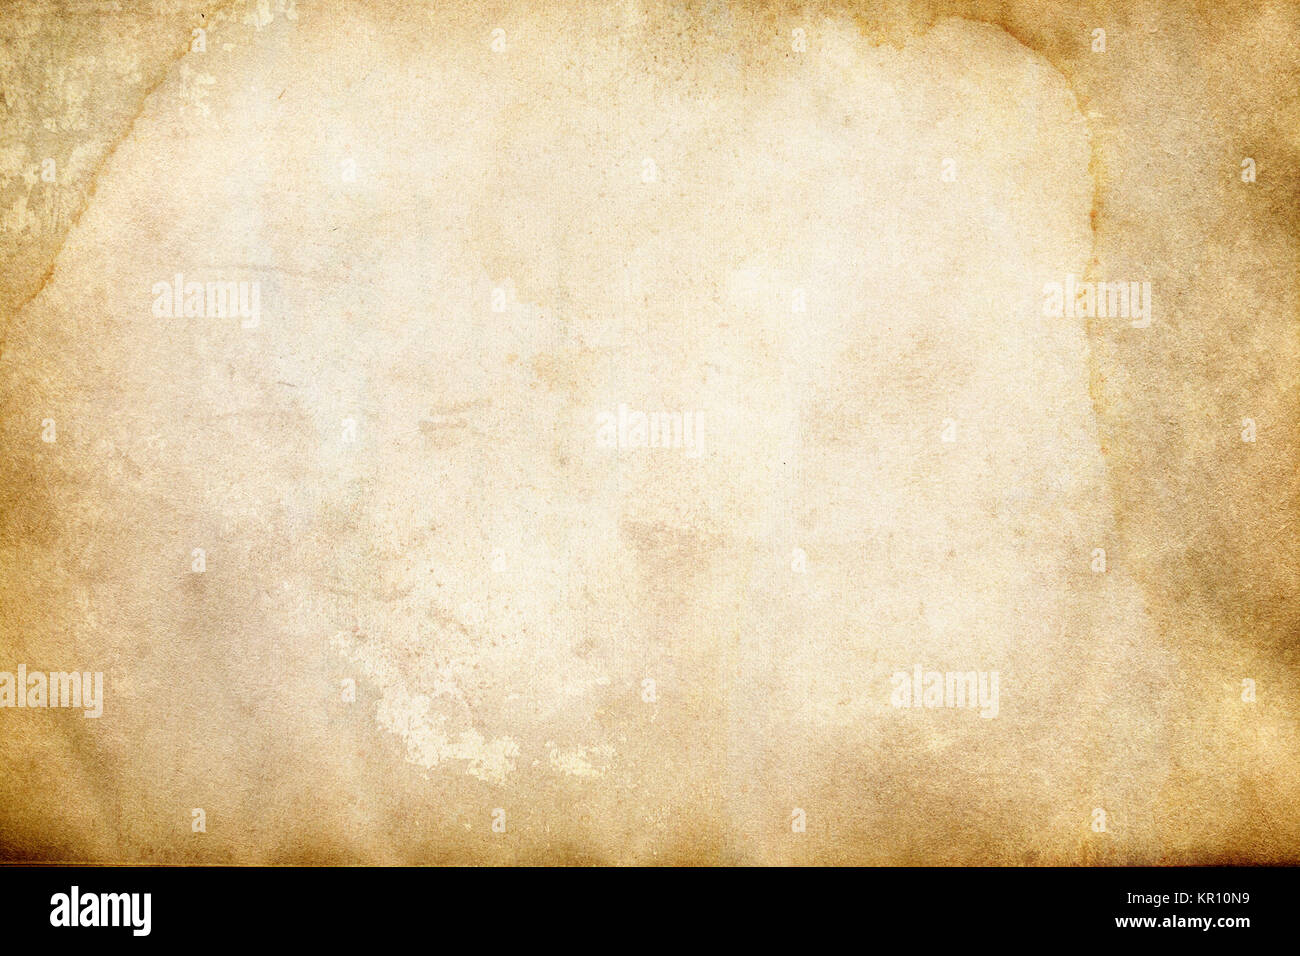 Old grunge paper background. Natural texture of aging paper. Stock Photo